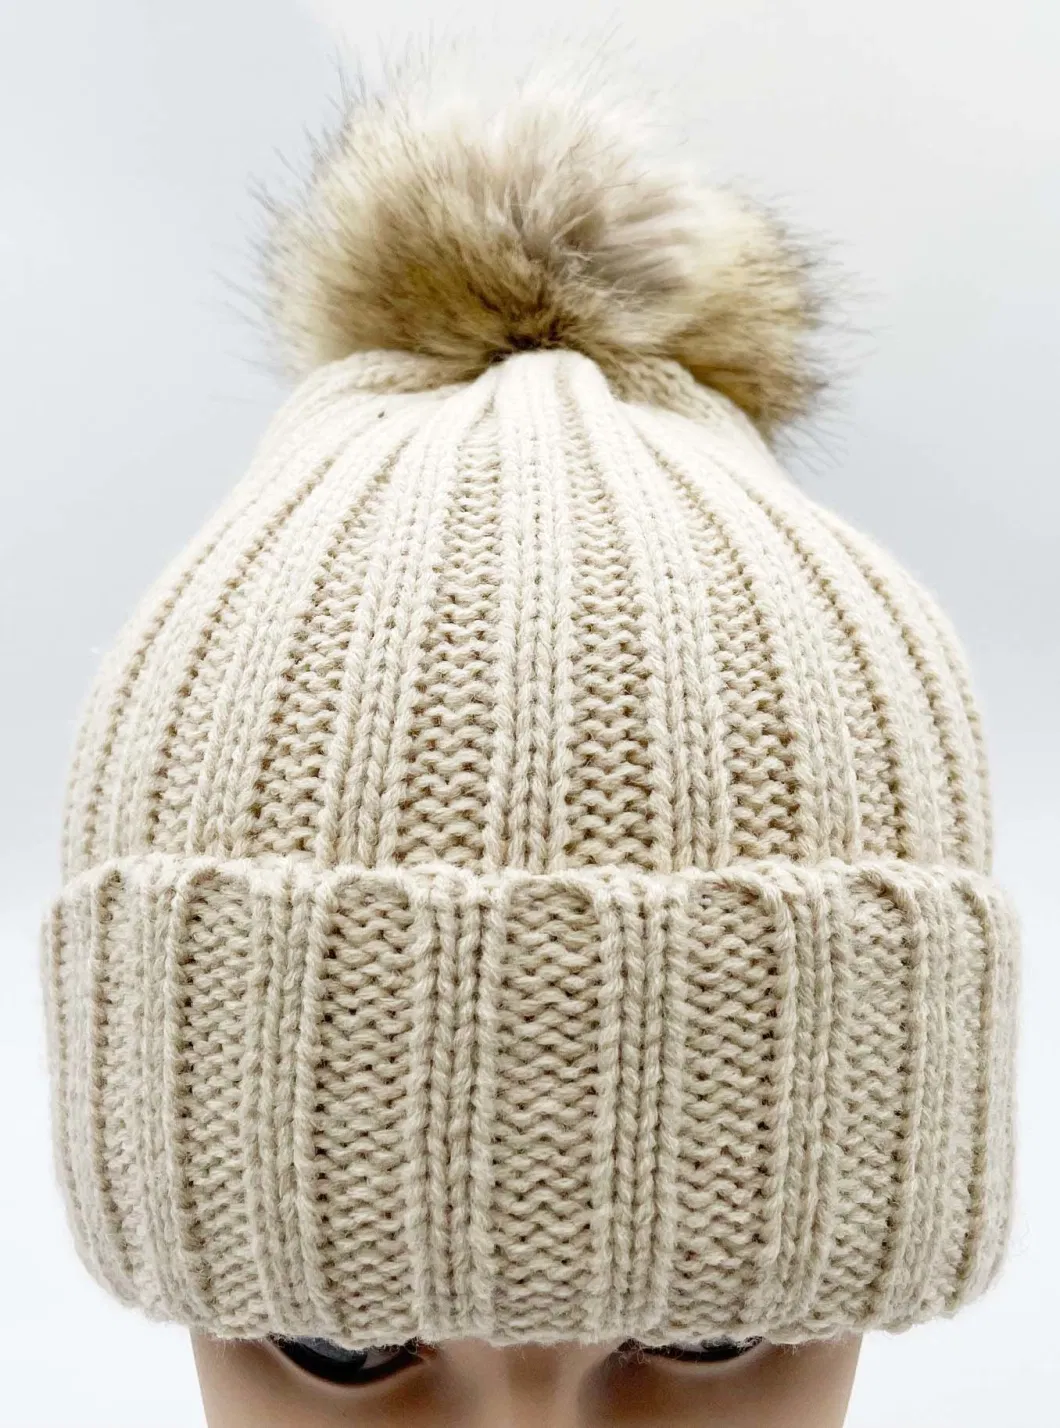 Solid Beige Color Acrylic Yarn Rib Knit Bobble Beanie Hat Scarf and Gloves